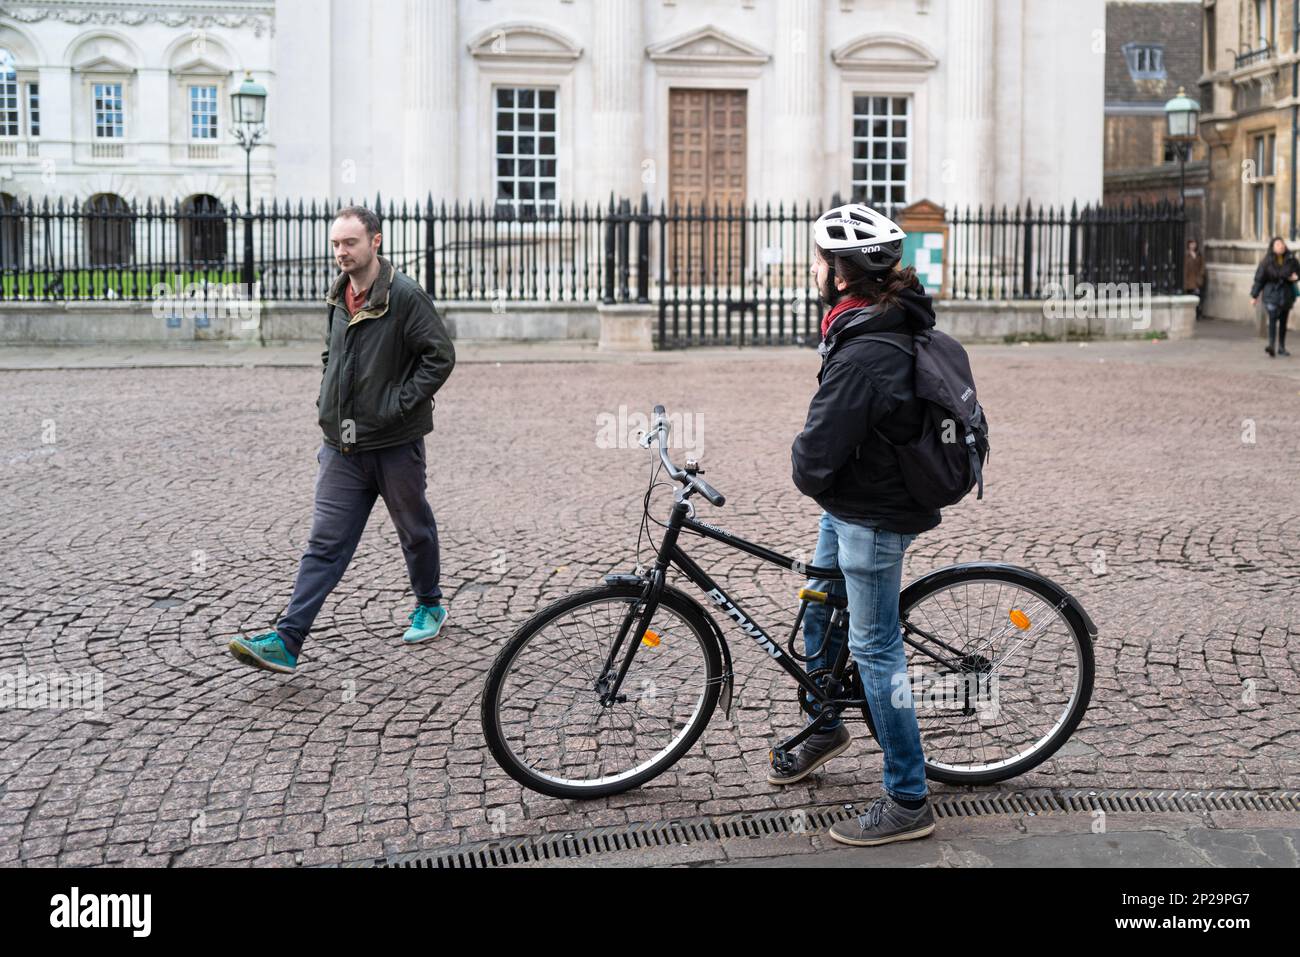 Male cyclist seen taking a rest in the historic University city. A passerby is seen walking from a famous University building in the background. Stock Photo